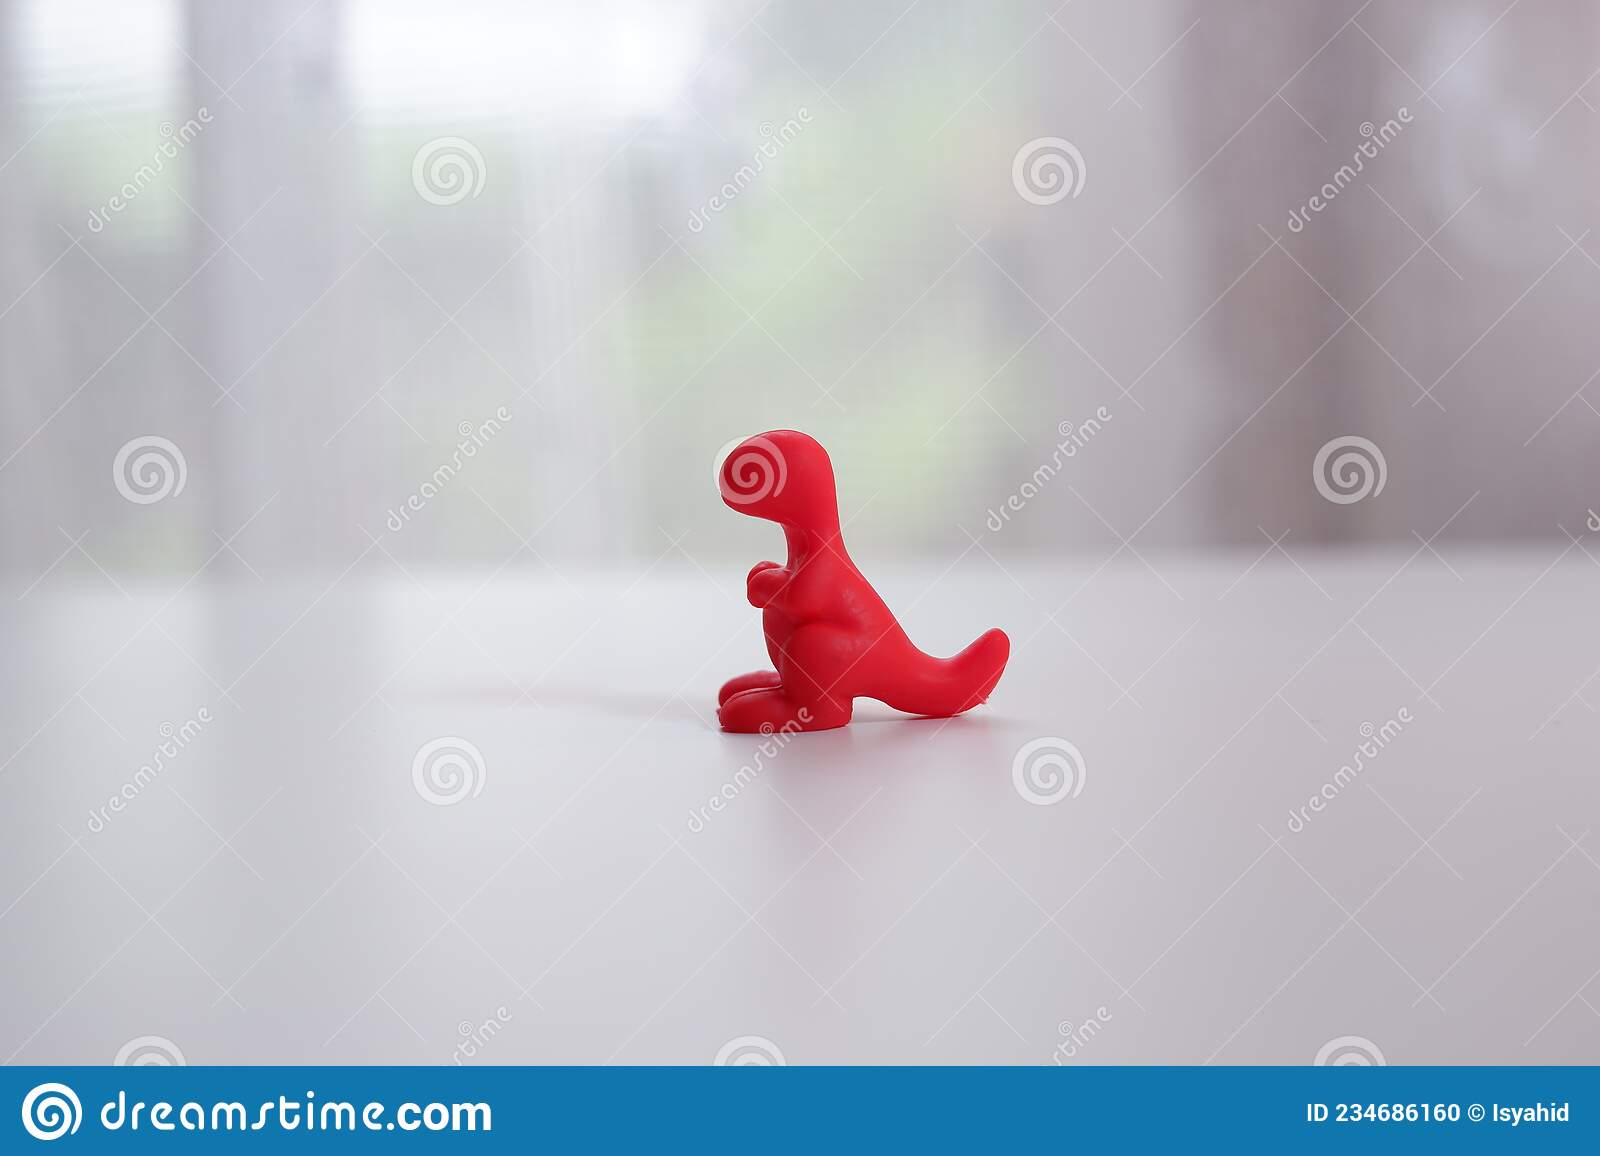 Photo of dinosaur toys with various colors stock photo